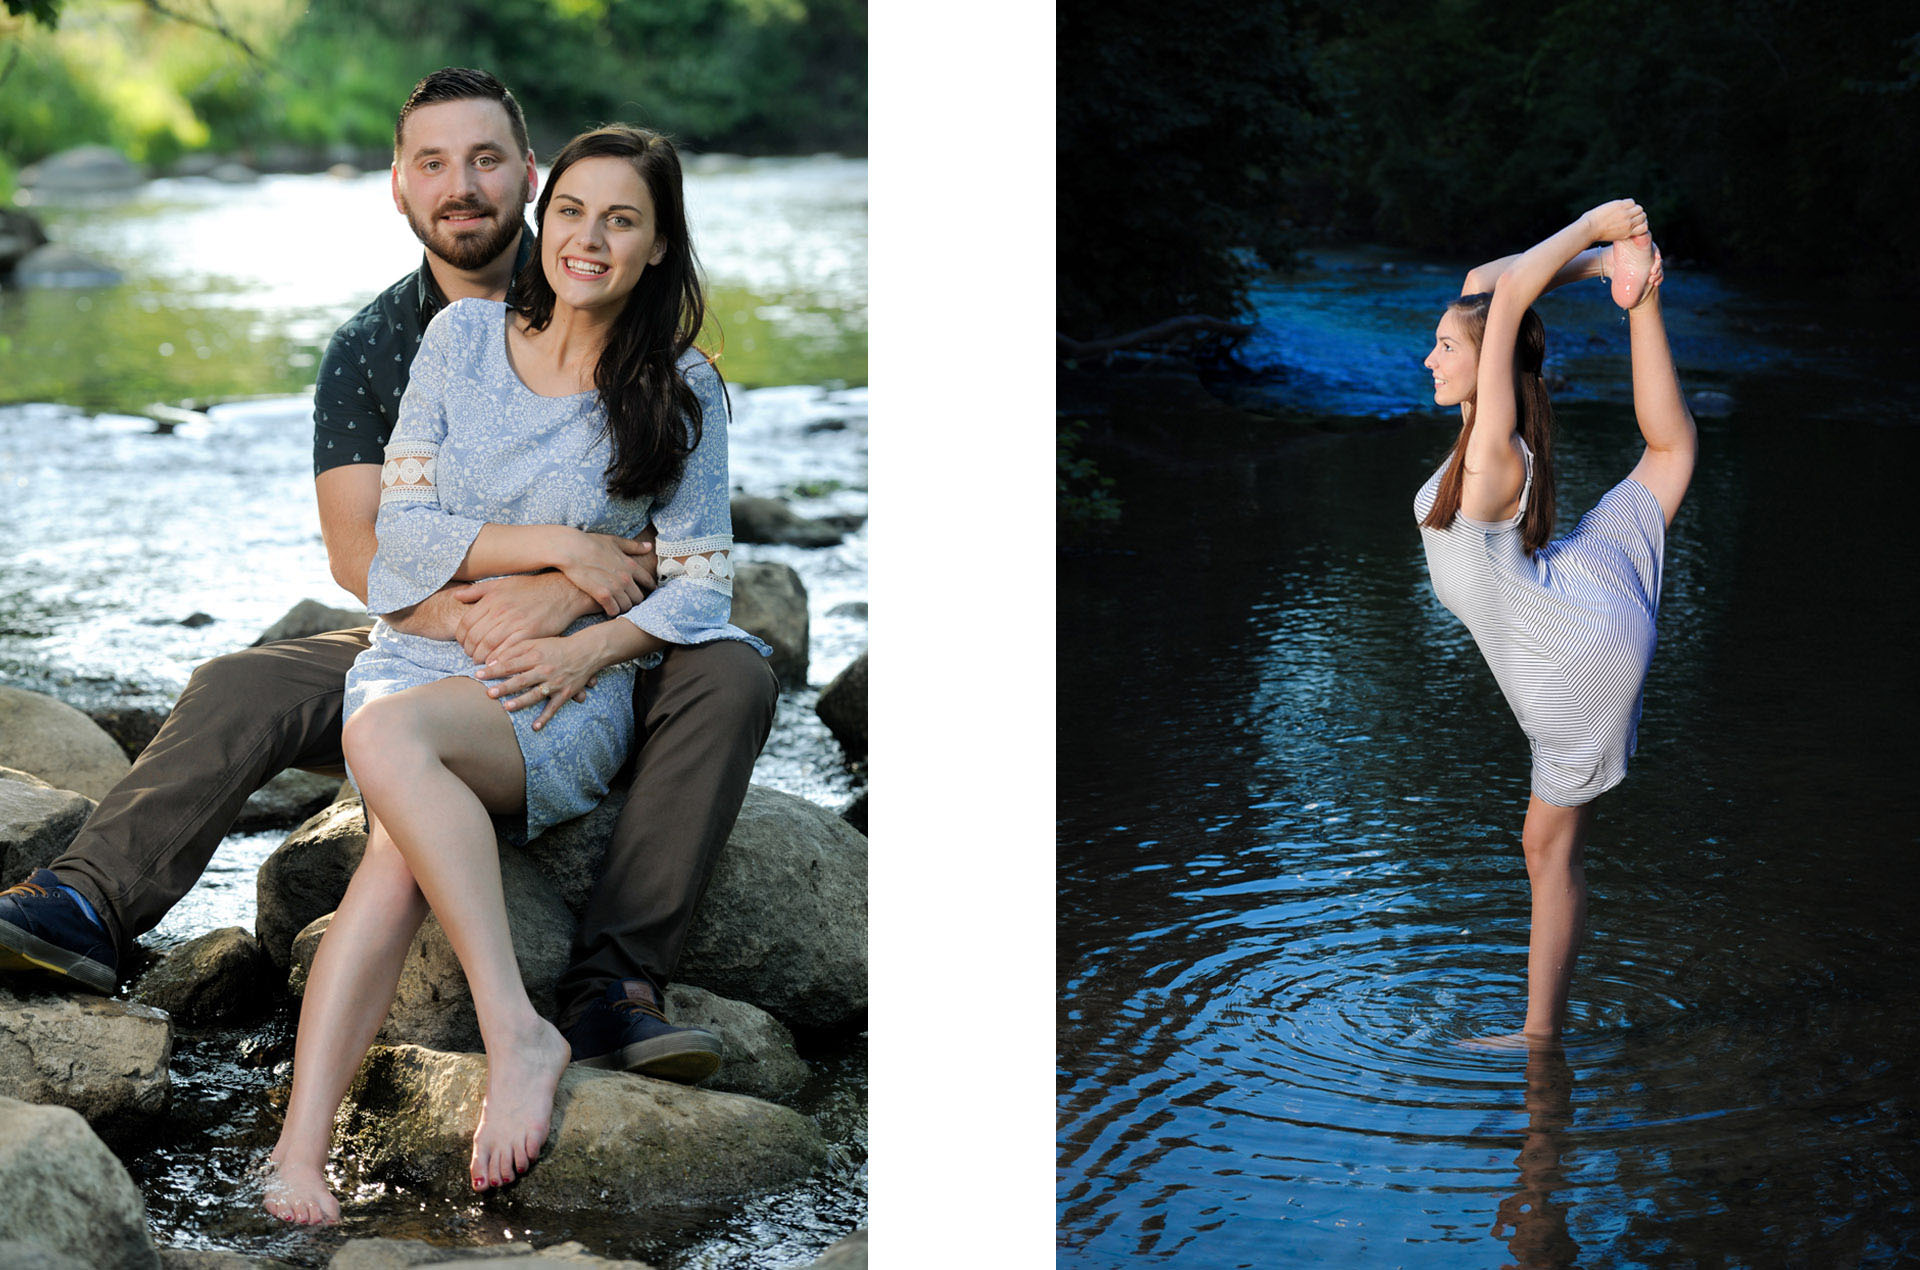 Best Rochester lifestyles photographer's fun and candid engagement photos capture the fun vibe of this couple in the Metro Detroit and Rochester, Michigan area.